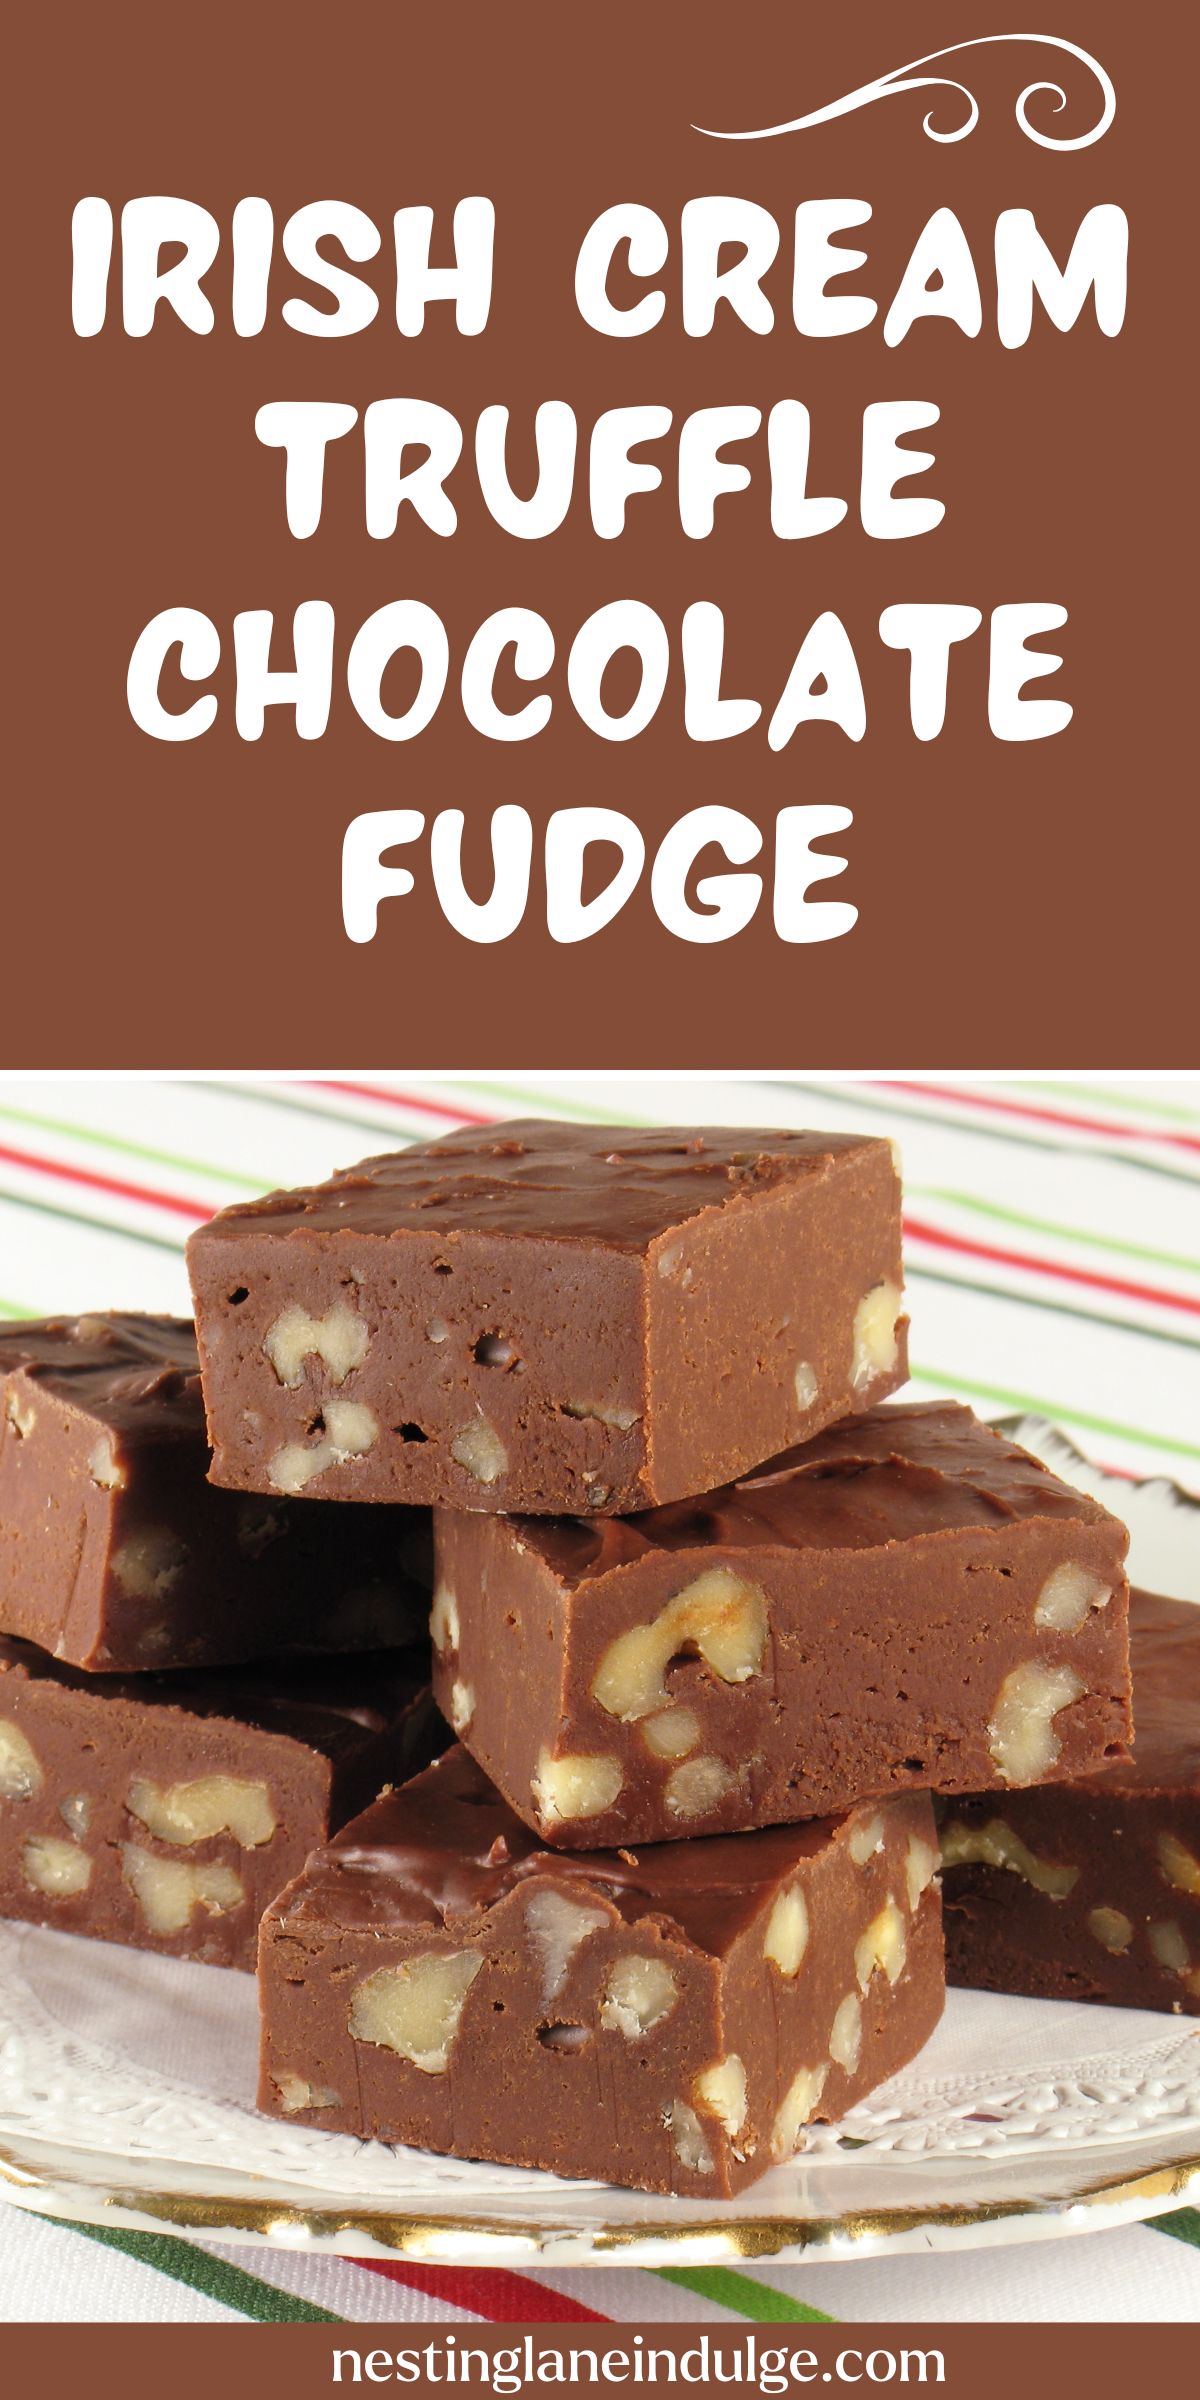 A Pinterest-style graphic with the text "Irish Cream Truffle Chocolate Fudge" in stylized brown lettering at the top, with a decorative swirl line underneath. Below the text is a vertical image of stacked pieces of rich brown chocolate fudge with visible chunks of nuts, on a white plate with a red and green striped border, suggesting a festive theme.